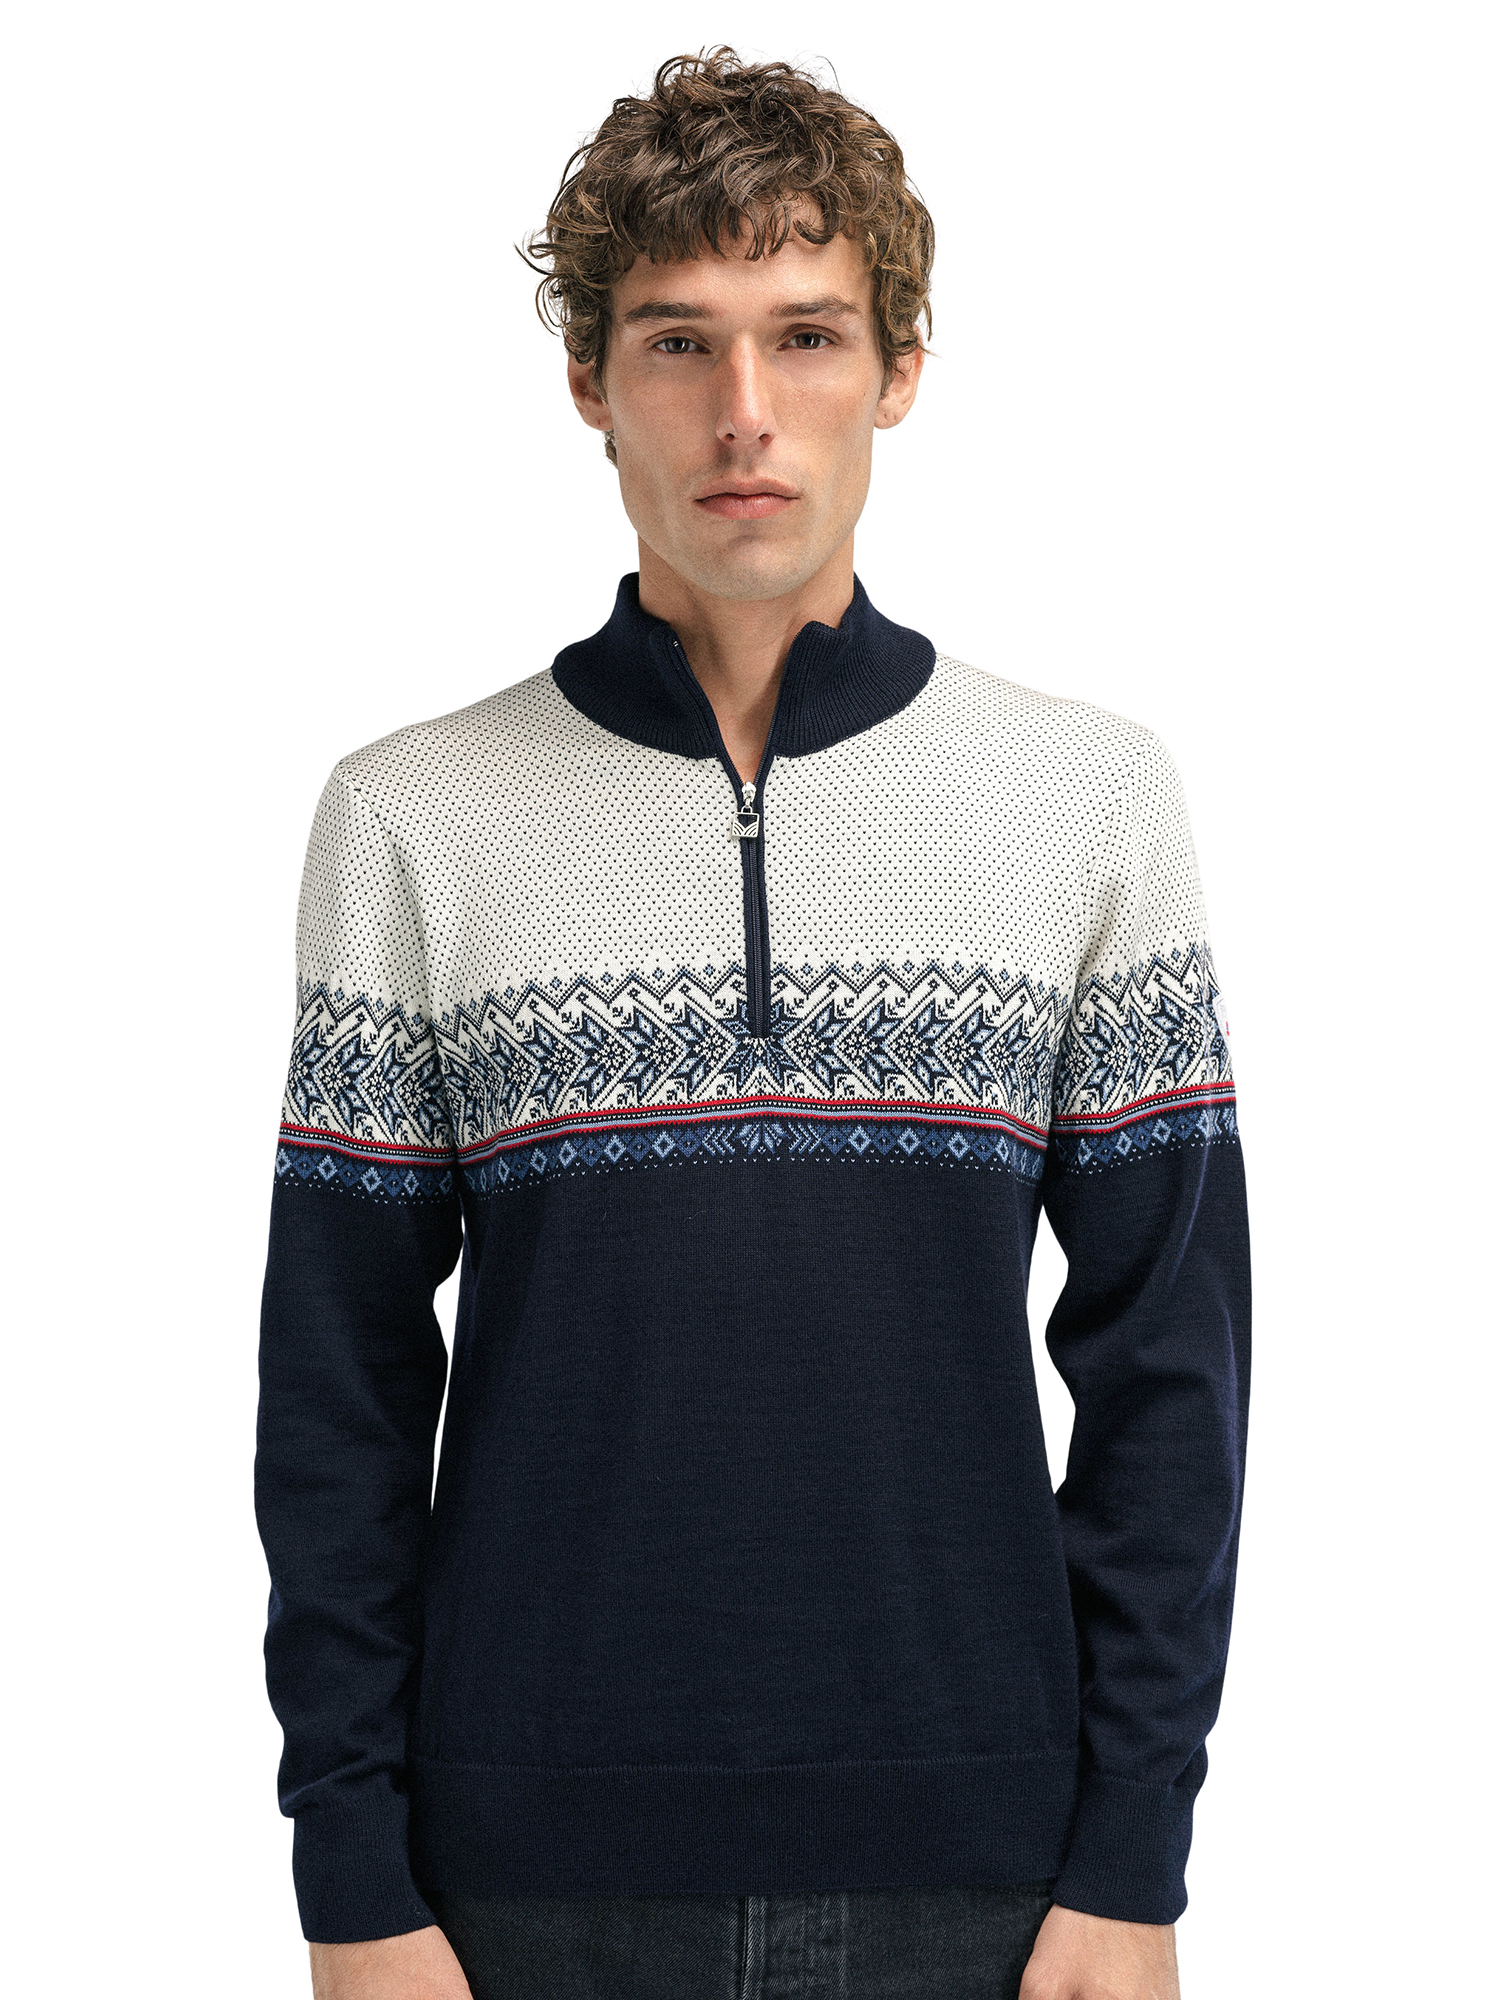 Hovden Sweater - Men - Navy/Blue - Dale of Norway - Dale of Norway